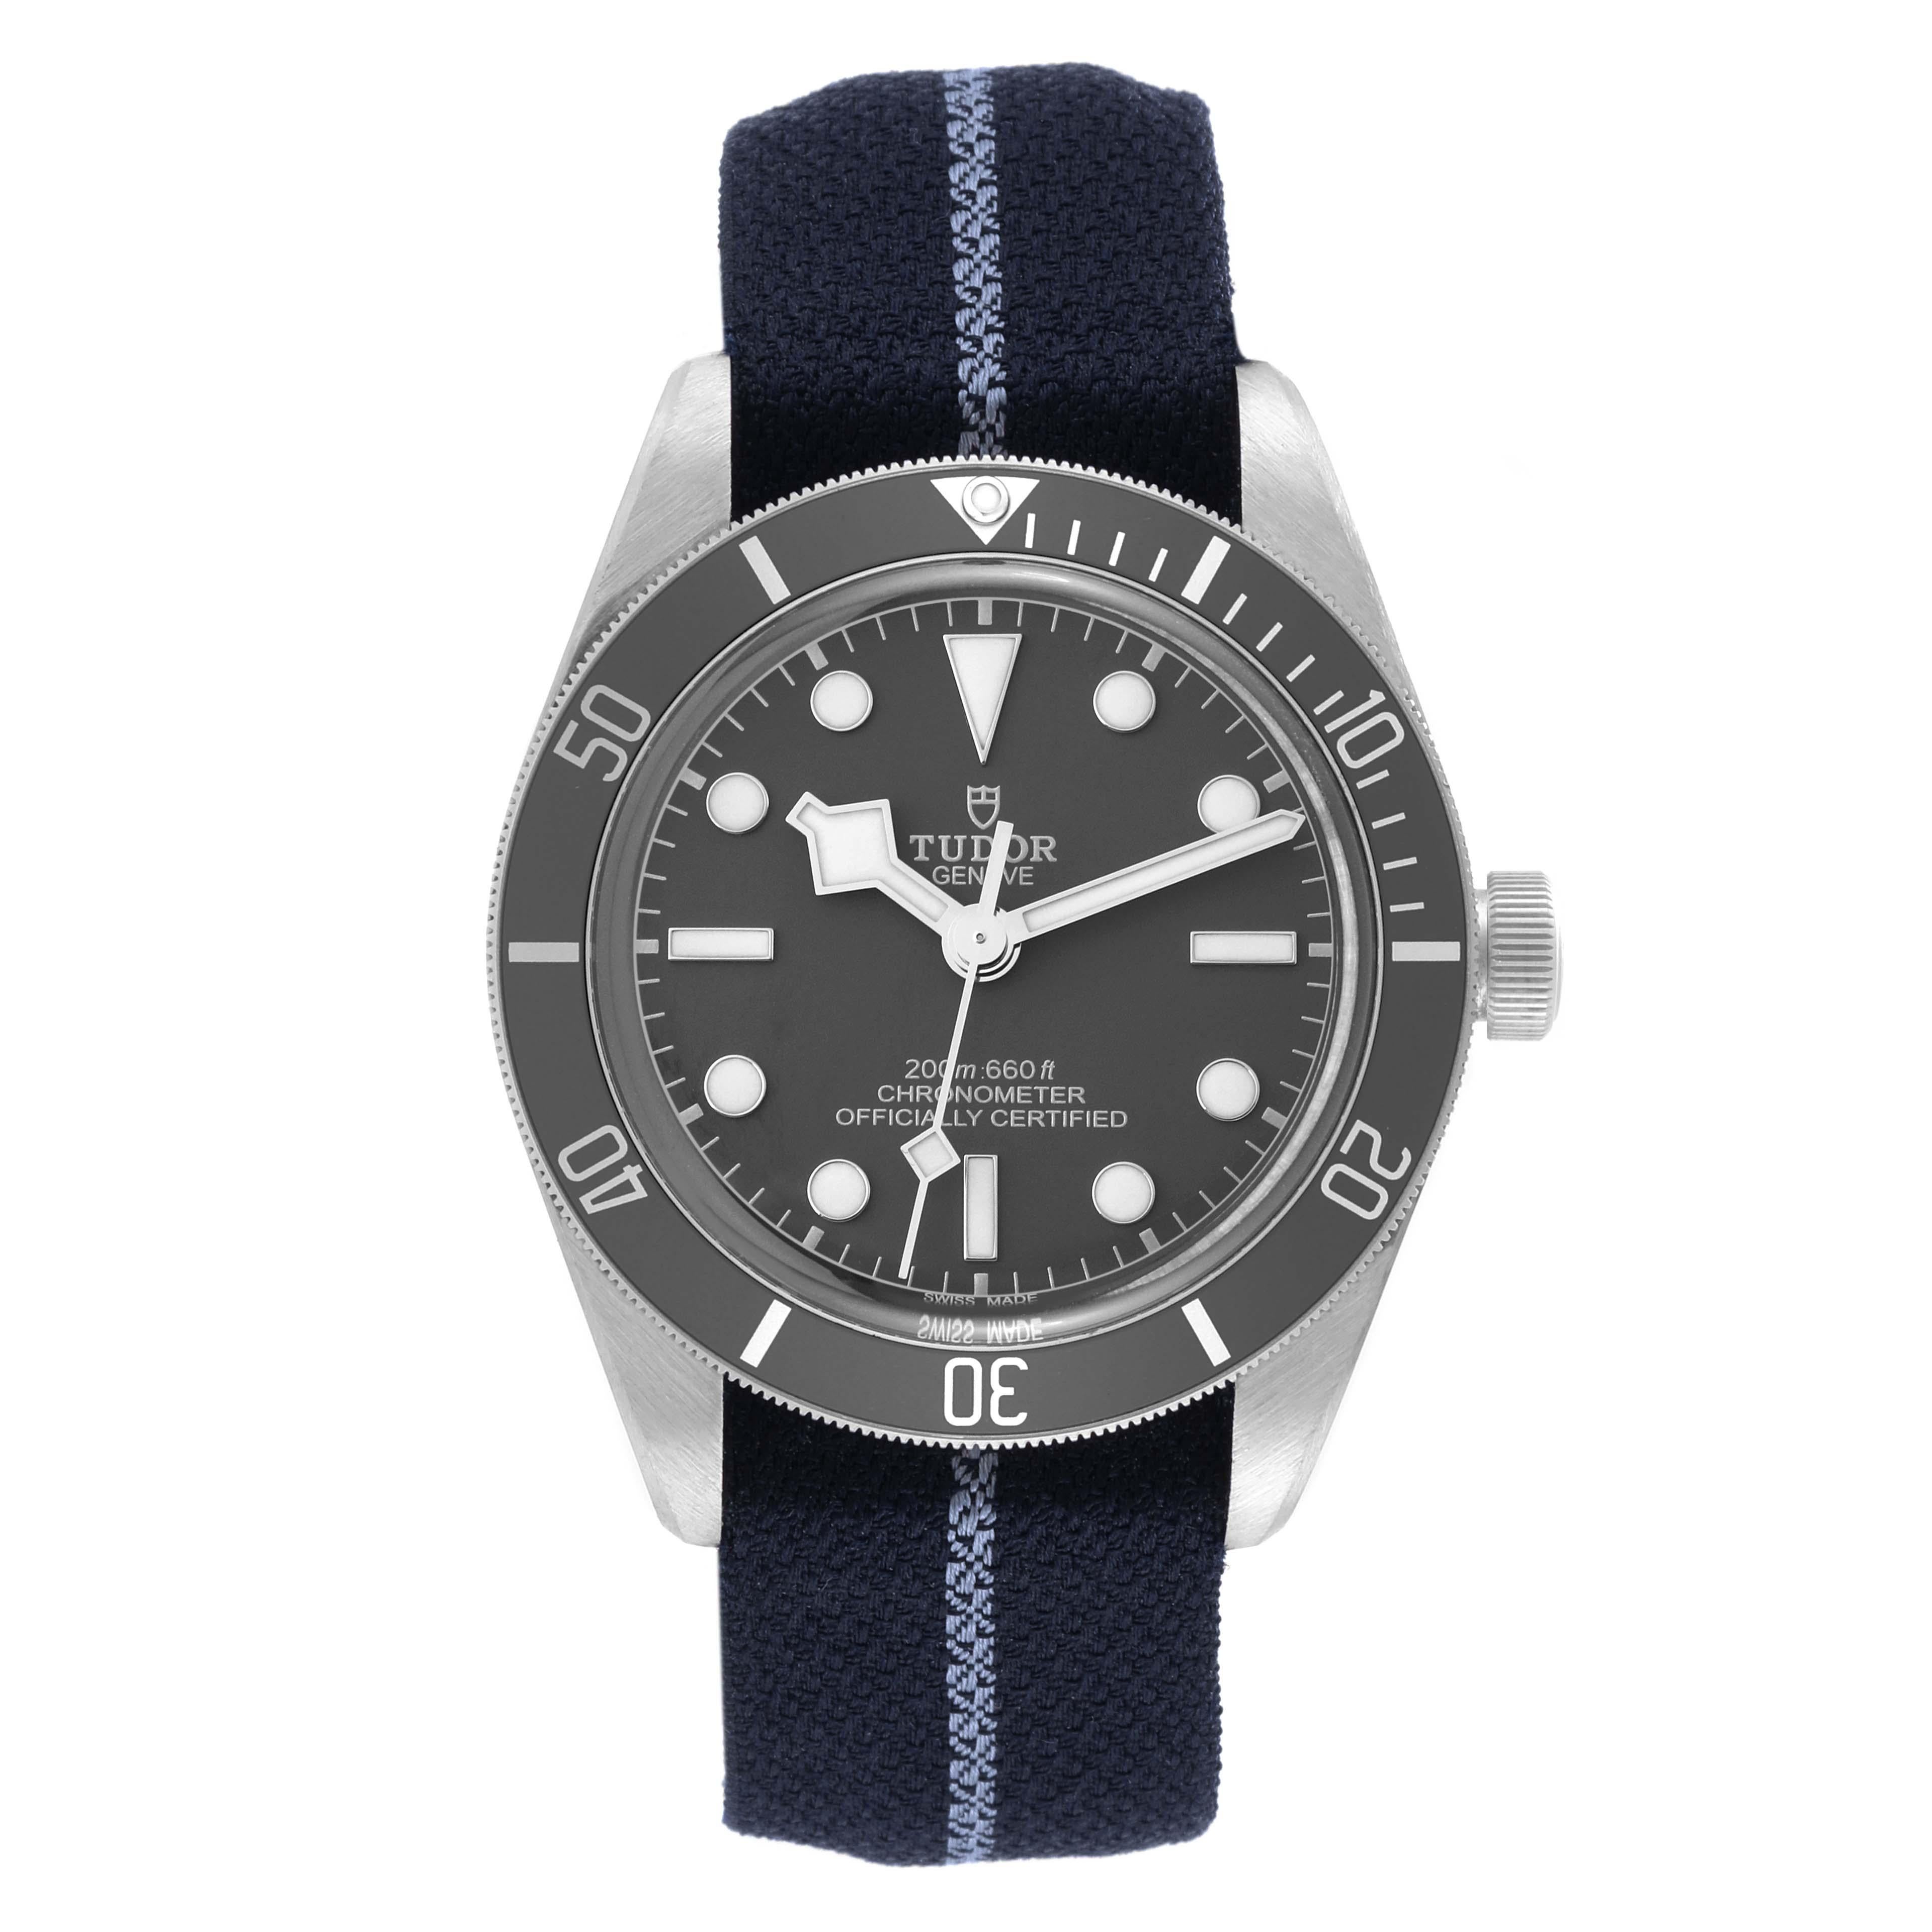 Tudor Heritage Black Bay Fifty-Eight 925 Silver Mens Watch 79010 Box Card. Automatic self-winding movement. Sterling silver oyster case 39.0 mm in diameter. Tudor logo on a crown. Unidirectional rotating bezel with grey insert. Scratch resistant